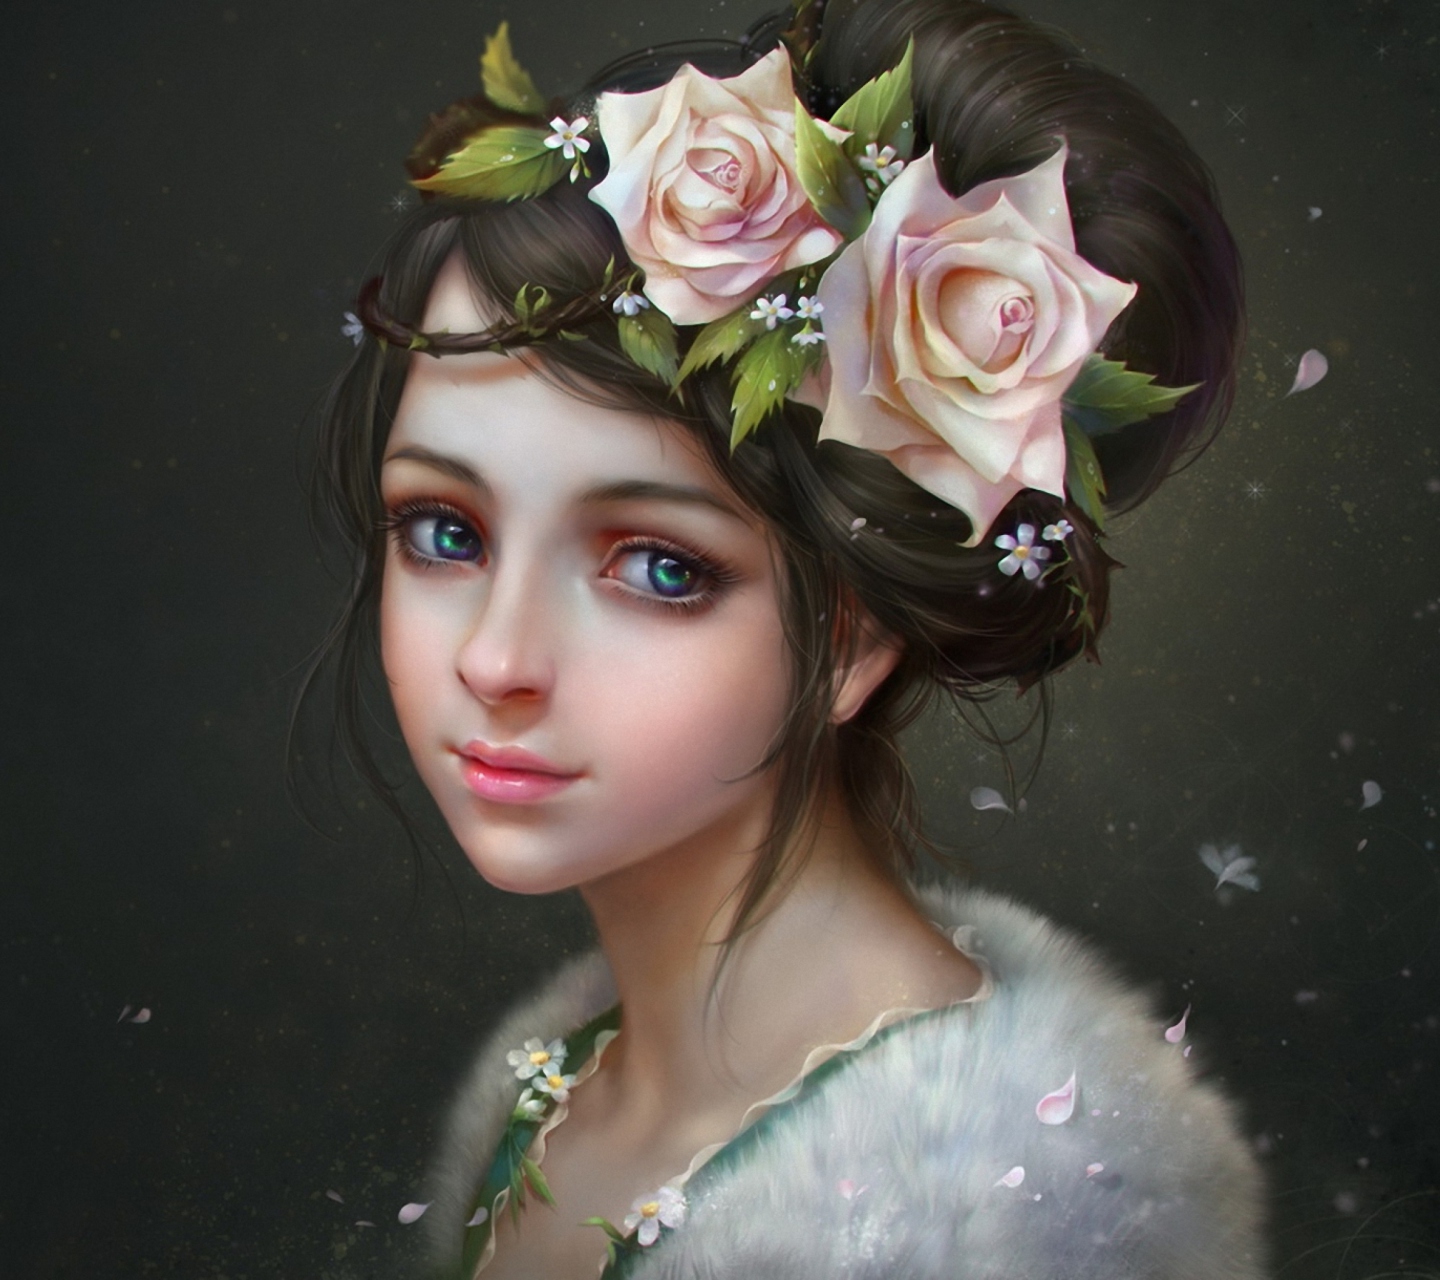 Girl With Roses In Her Hair Painting screenshot #1 1440x1280